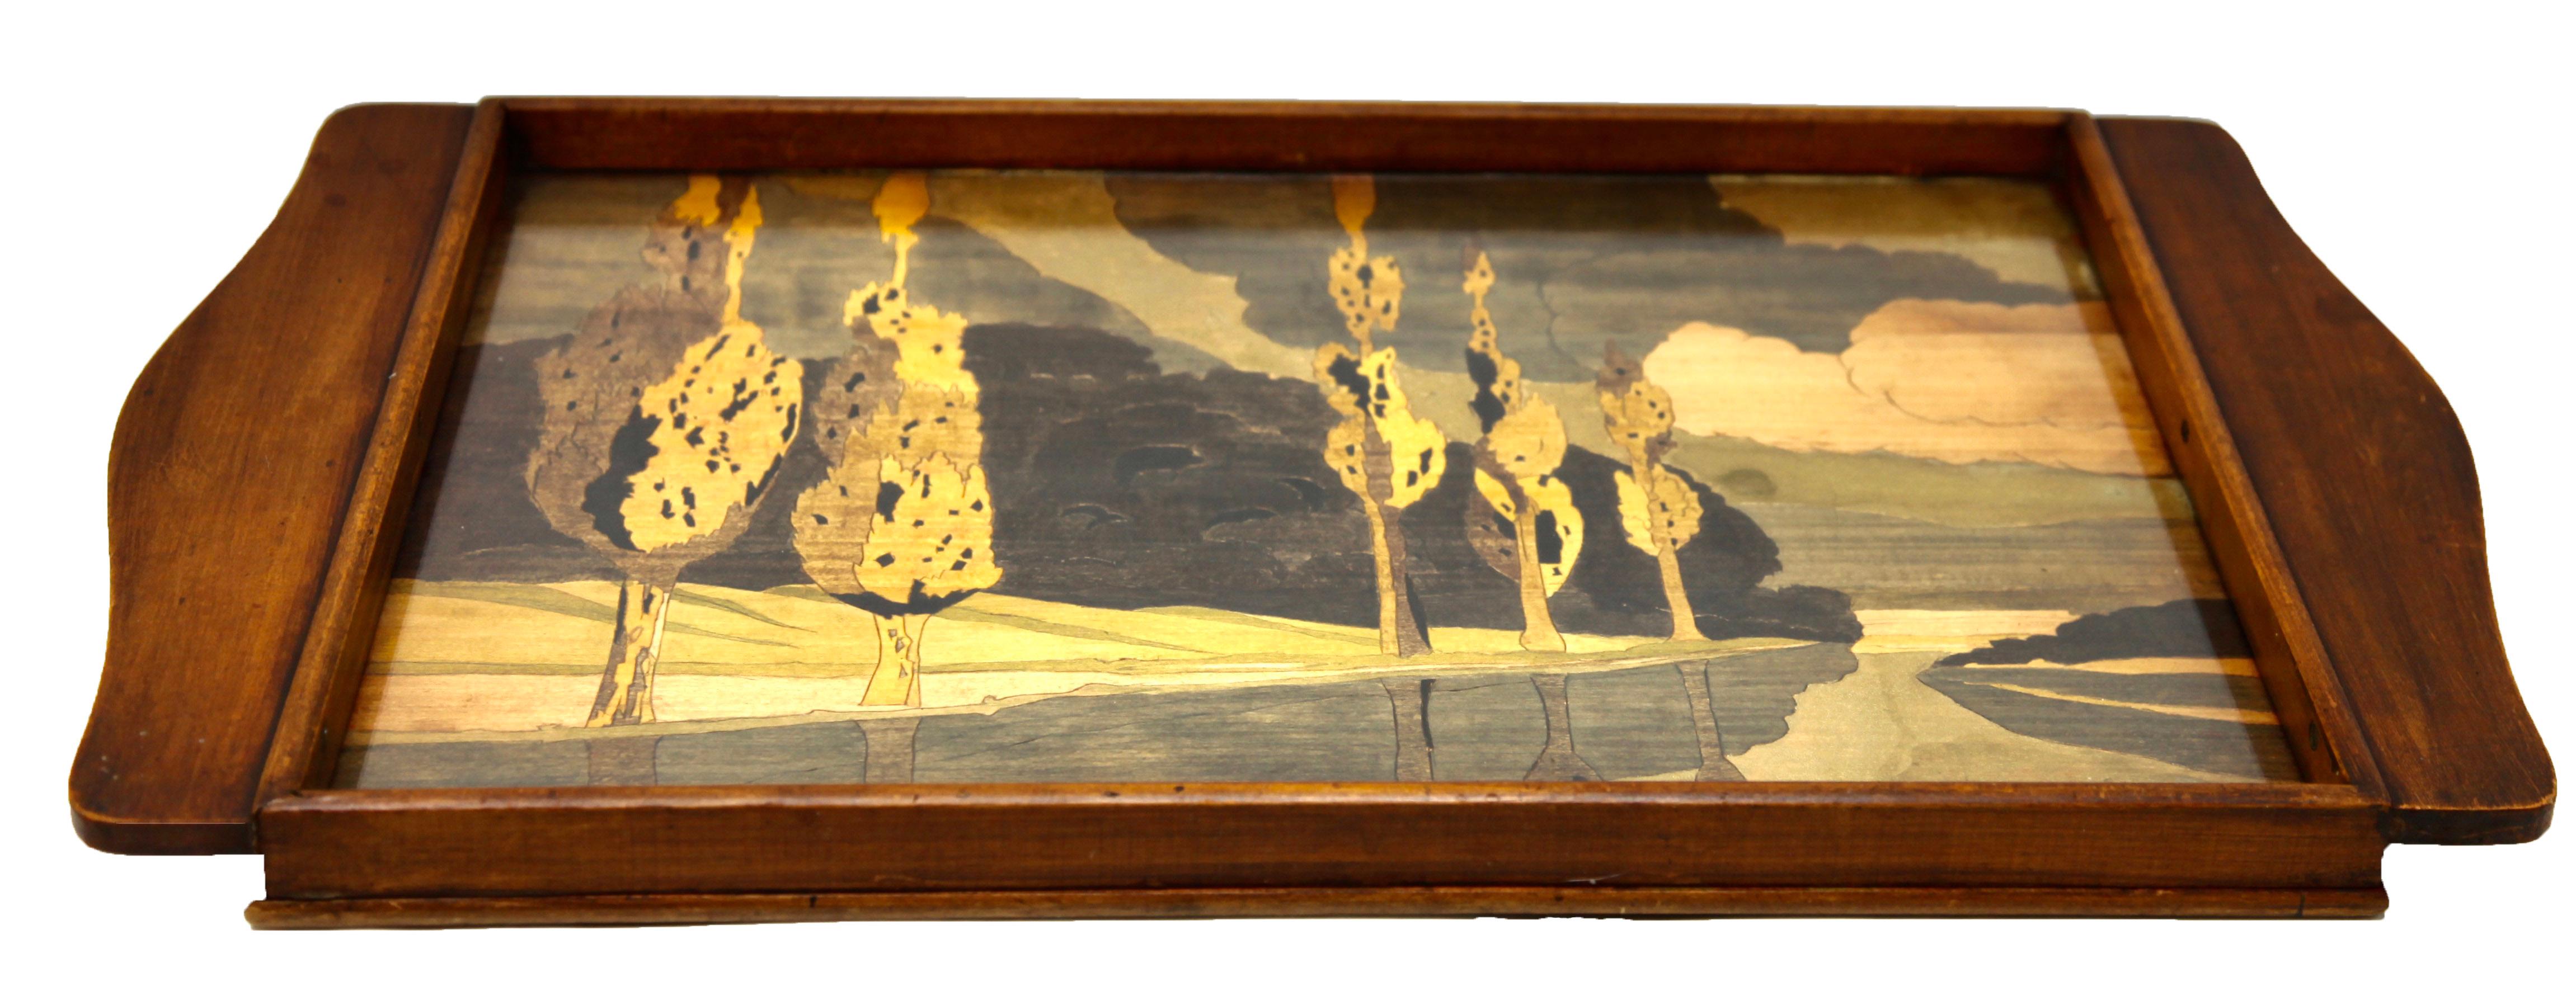 Early 20th Century Art Nouveau Tray with Wood Panel Covert with Glass and Landscape Decoration For Sale